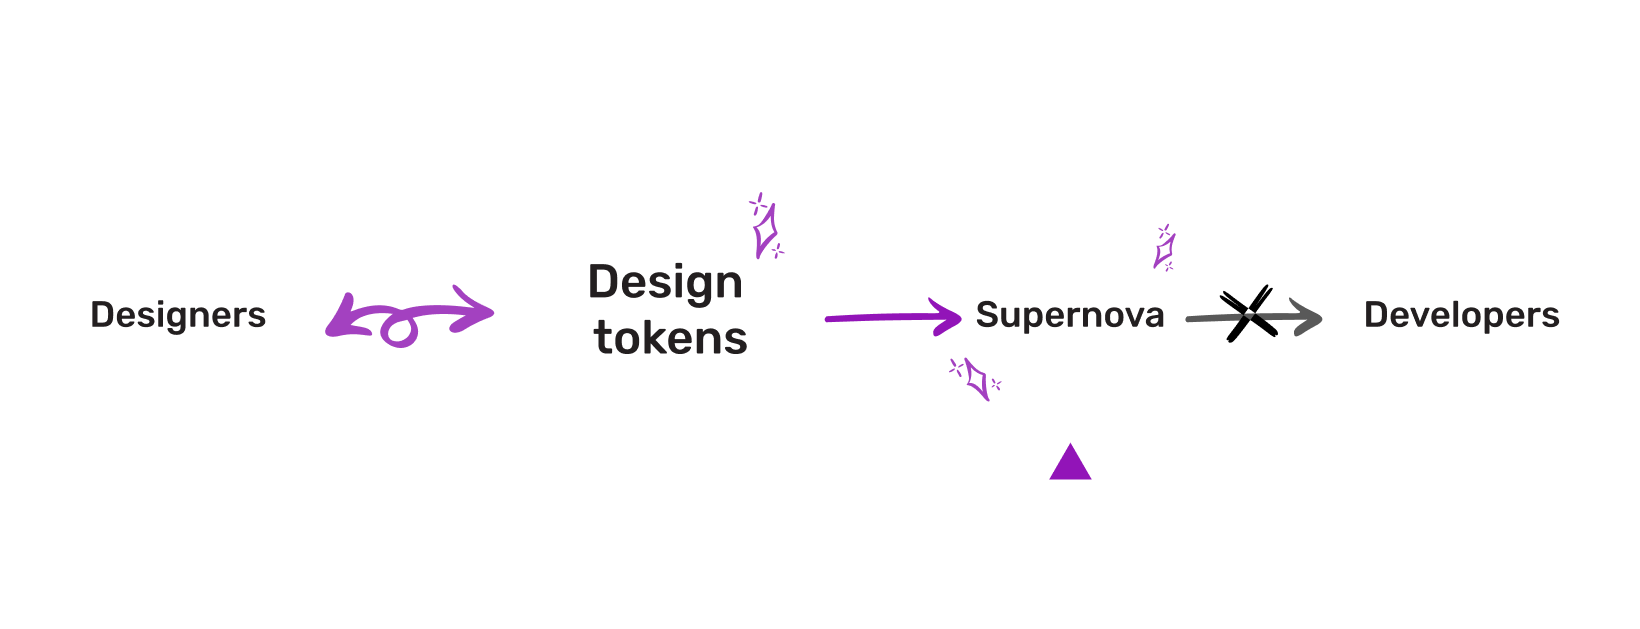 Schema: design tokens in the middle, linked bidirectionnaly to designers on the left.  It is now linked to Supernova on the right, but a crossed out arrow toward developers on the far right remains.